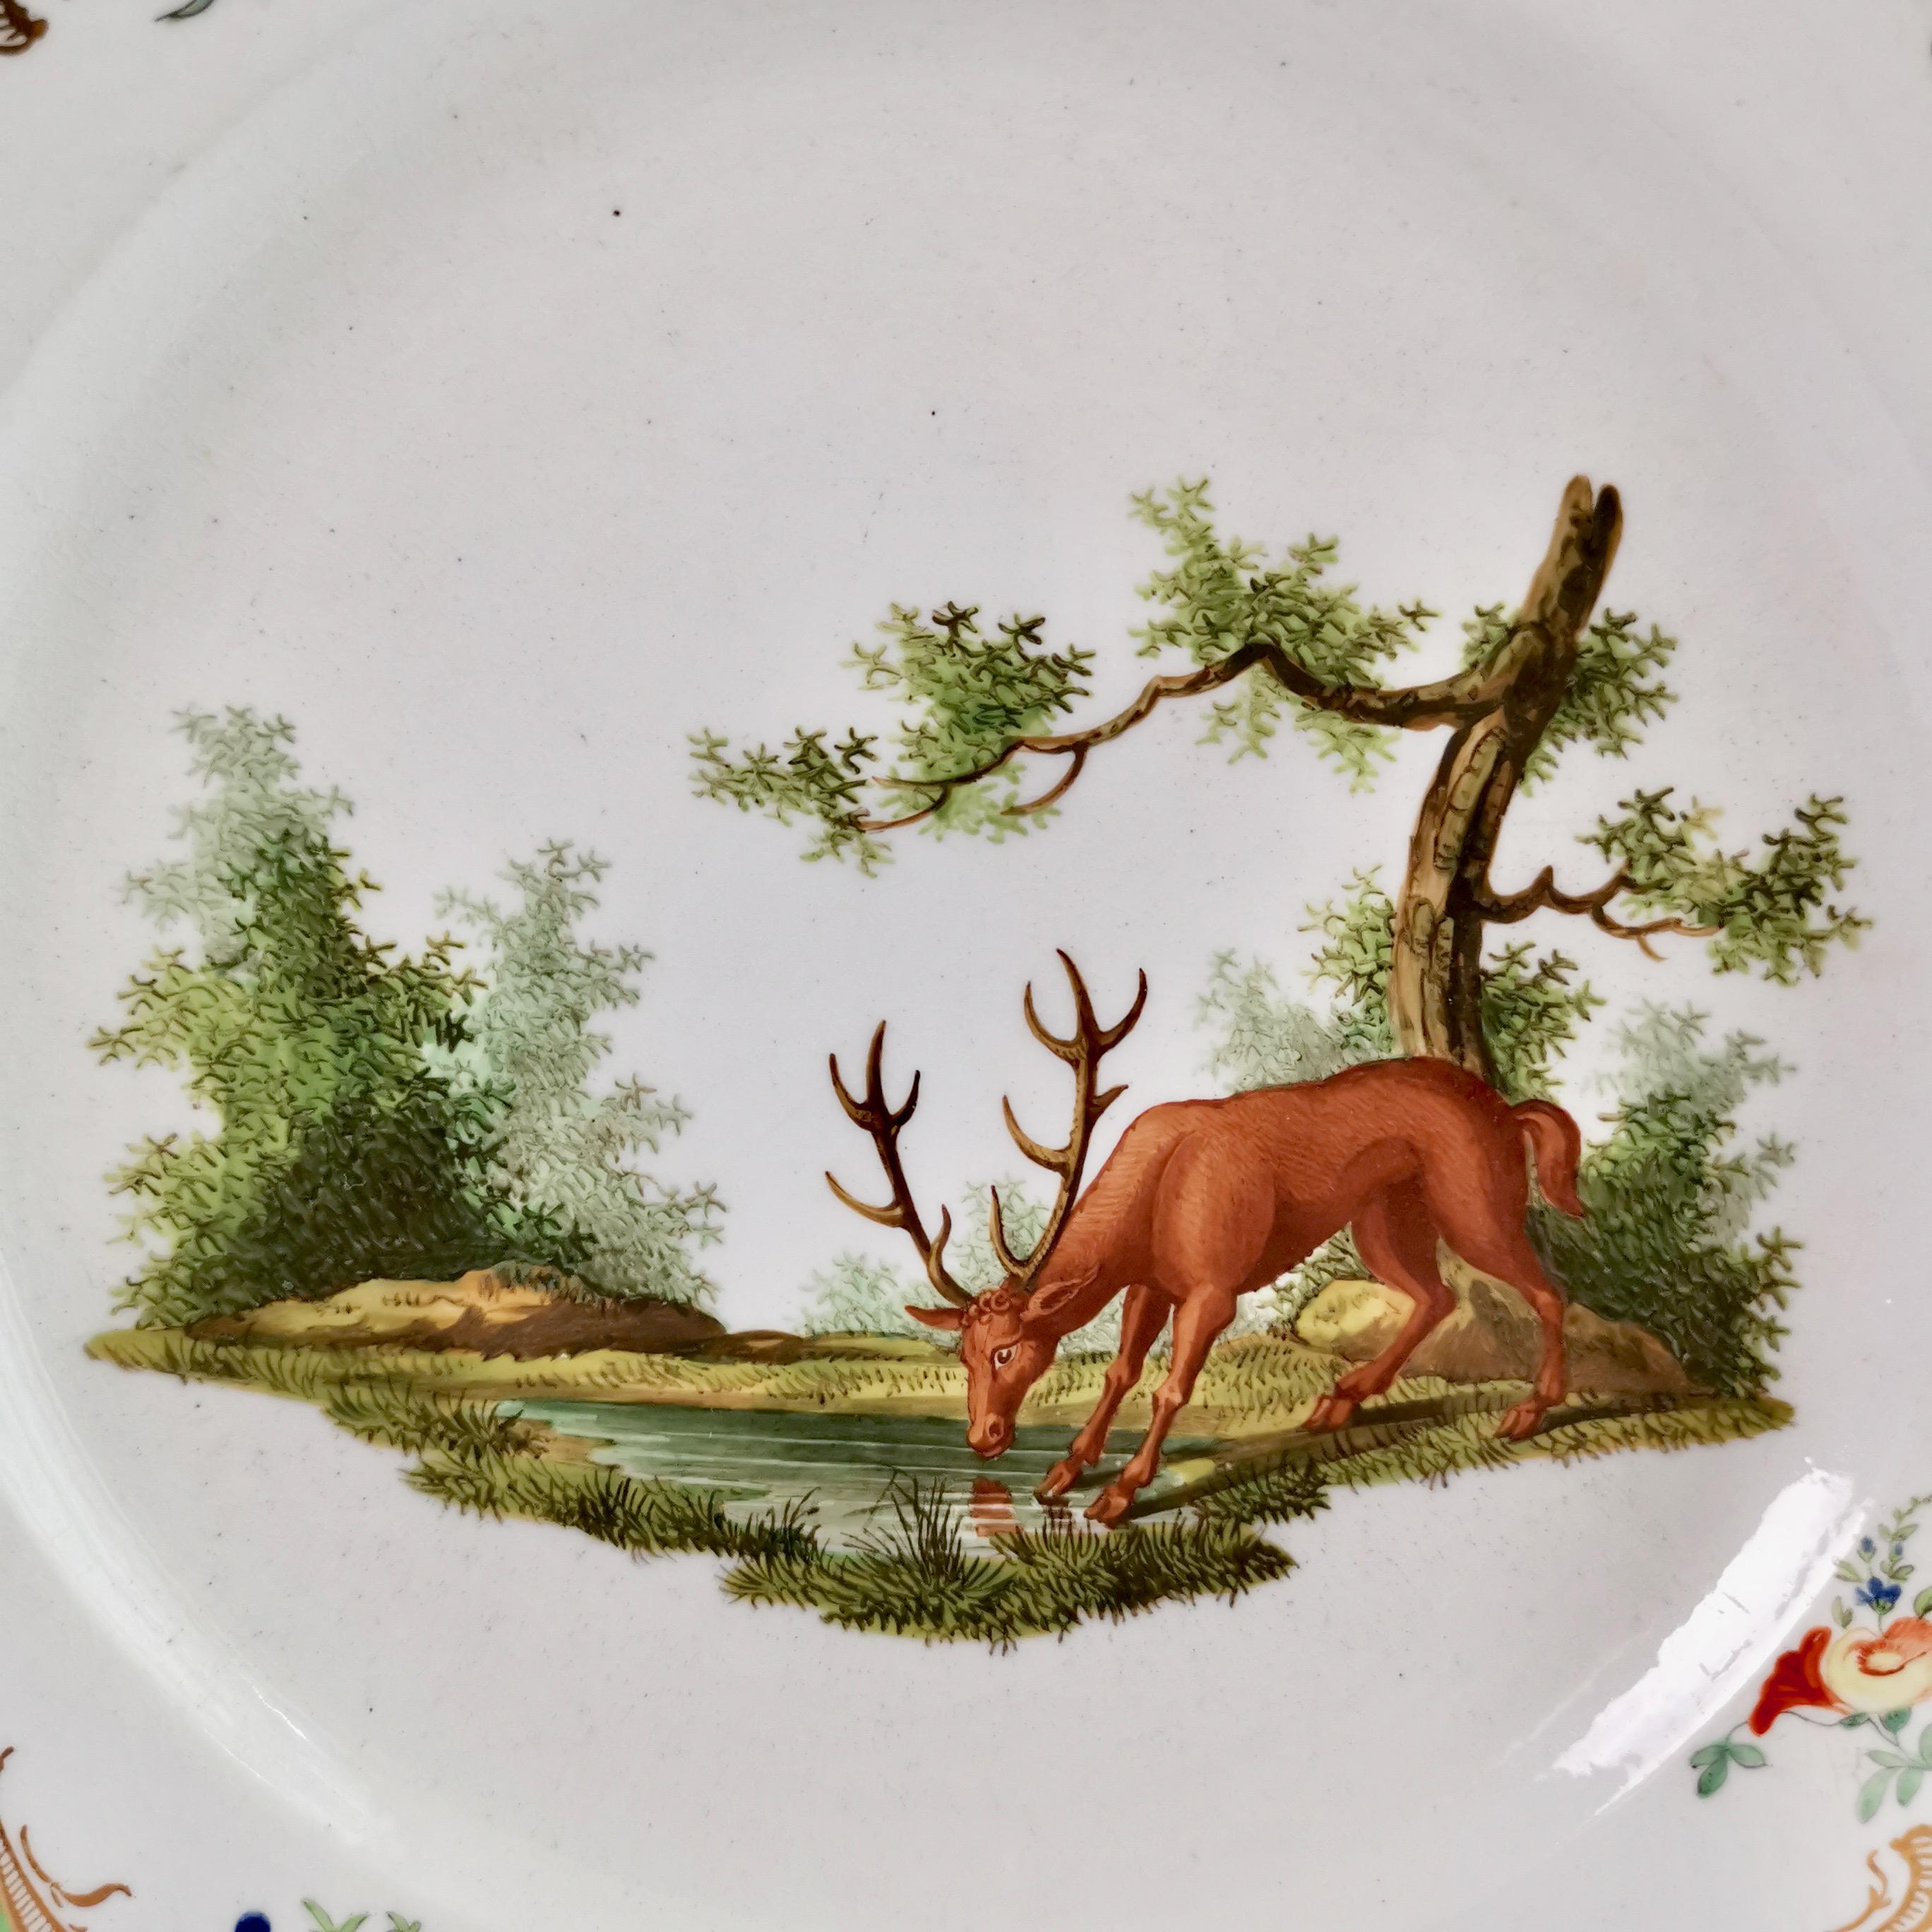 English Coalport Porcelain Plate, Green Fables Pattern Drinking Stag, Georgian ca 1805